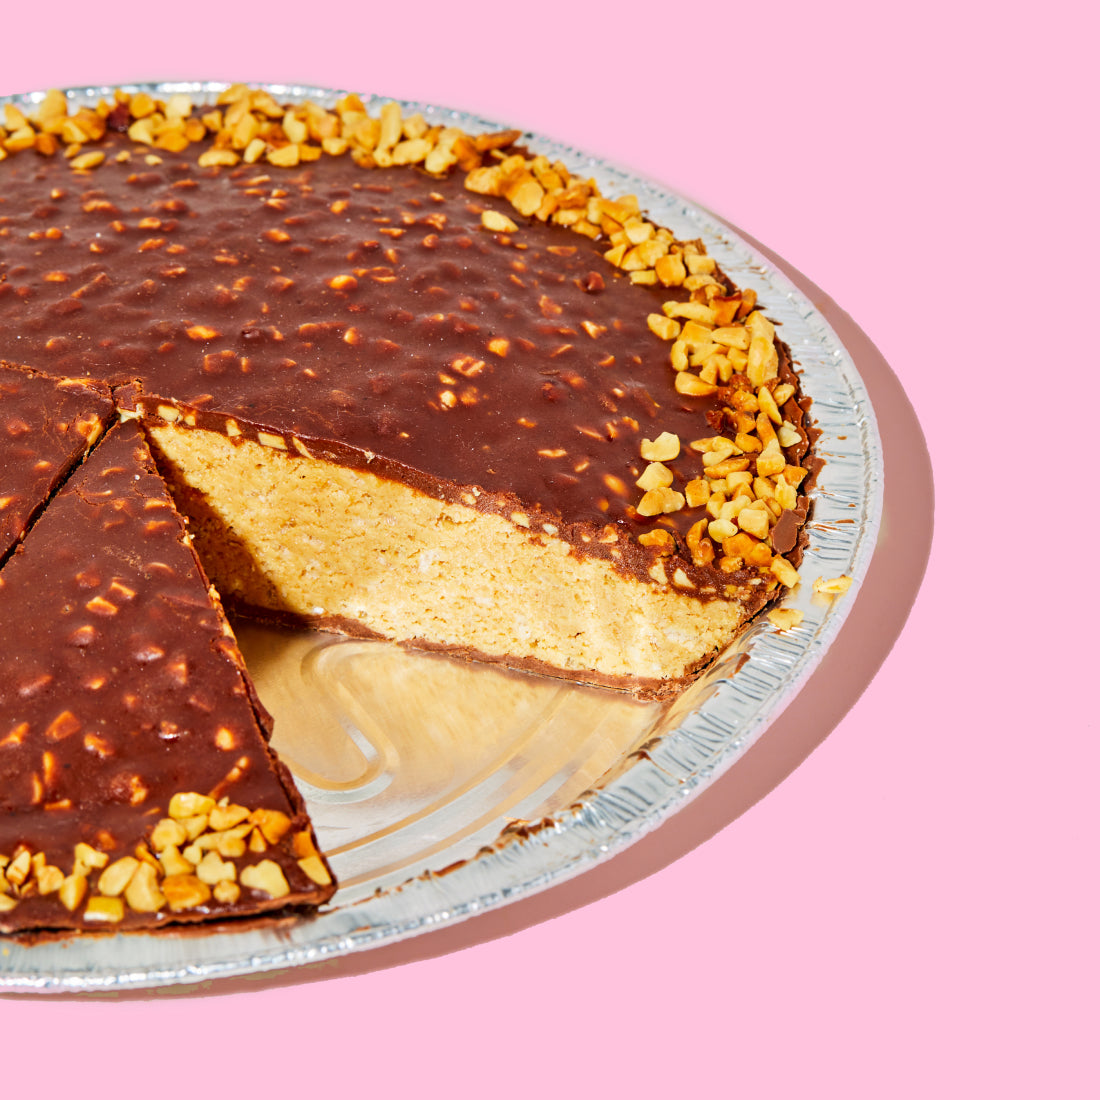 A whole peanut butter crunch pie with a slice removed from the pan.